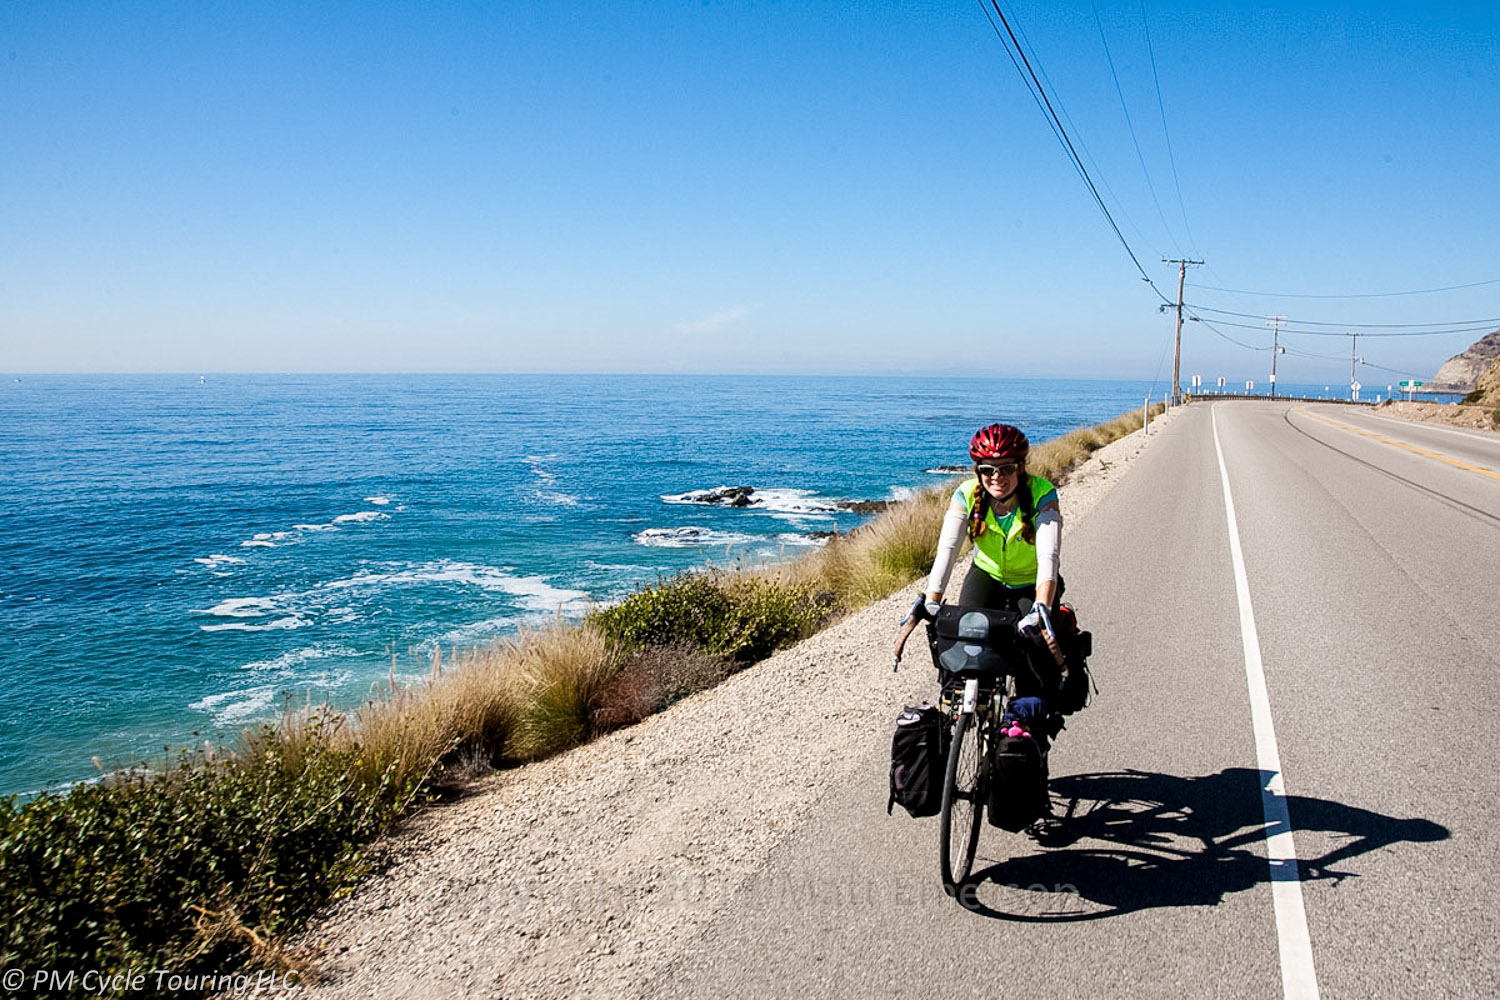 A bicycle rider on a fully loaded touring bicycle rides on the shoulder near the ocean